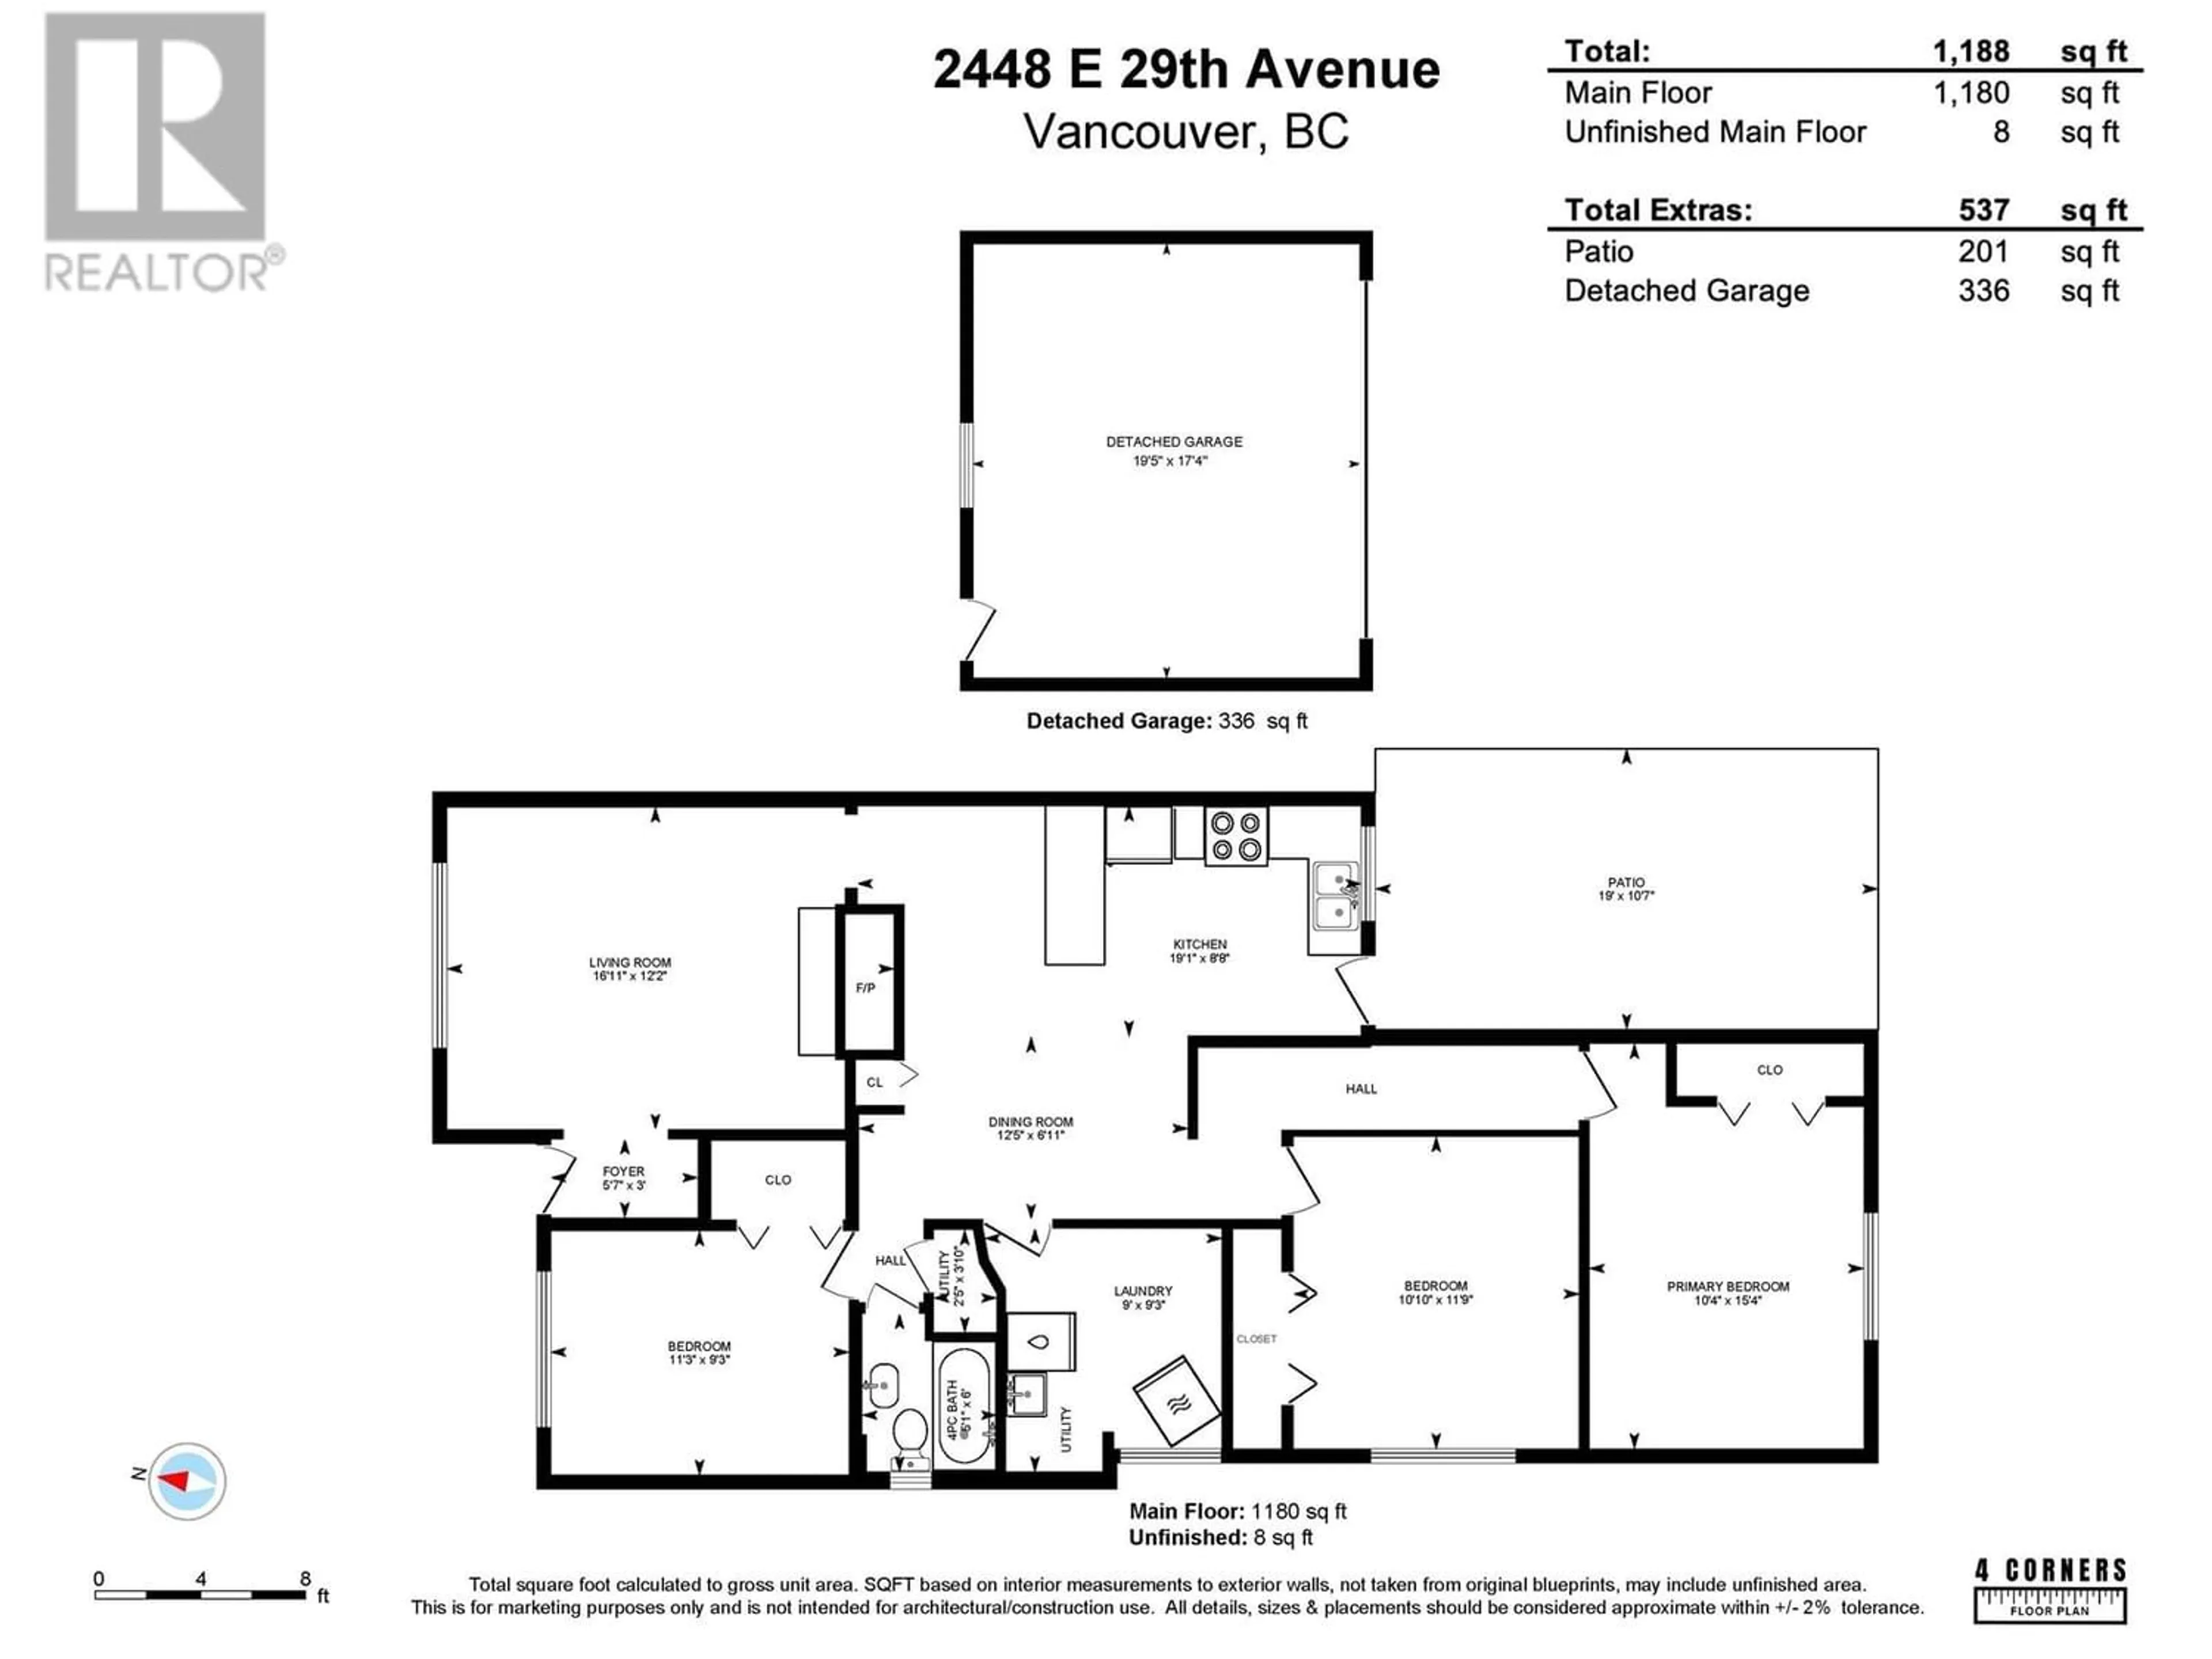 Floor plan for 2448 EAST 29 AVENUE, Vancouver British Columbia V5R1T9